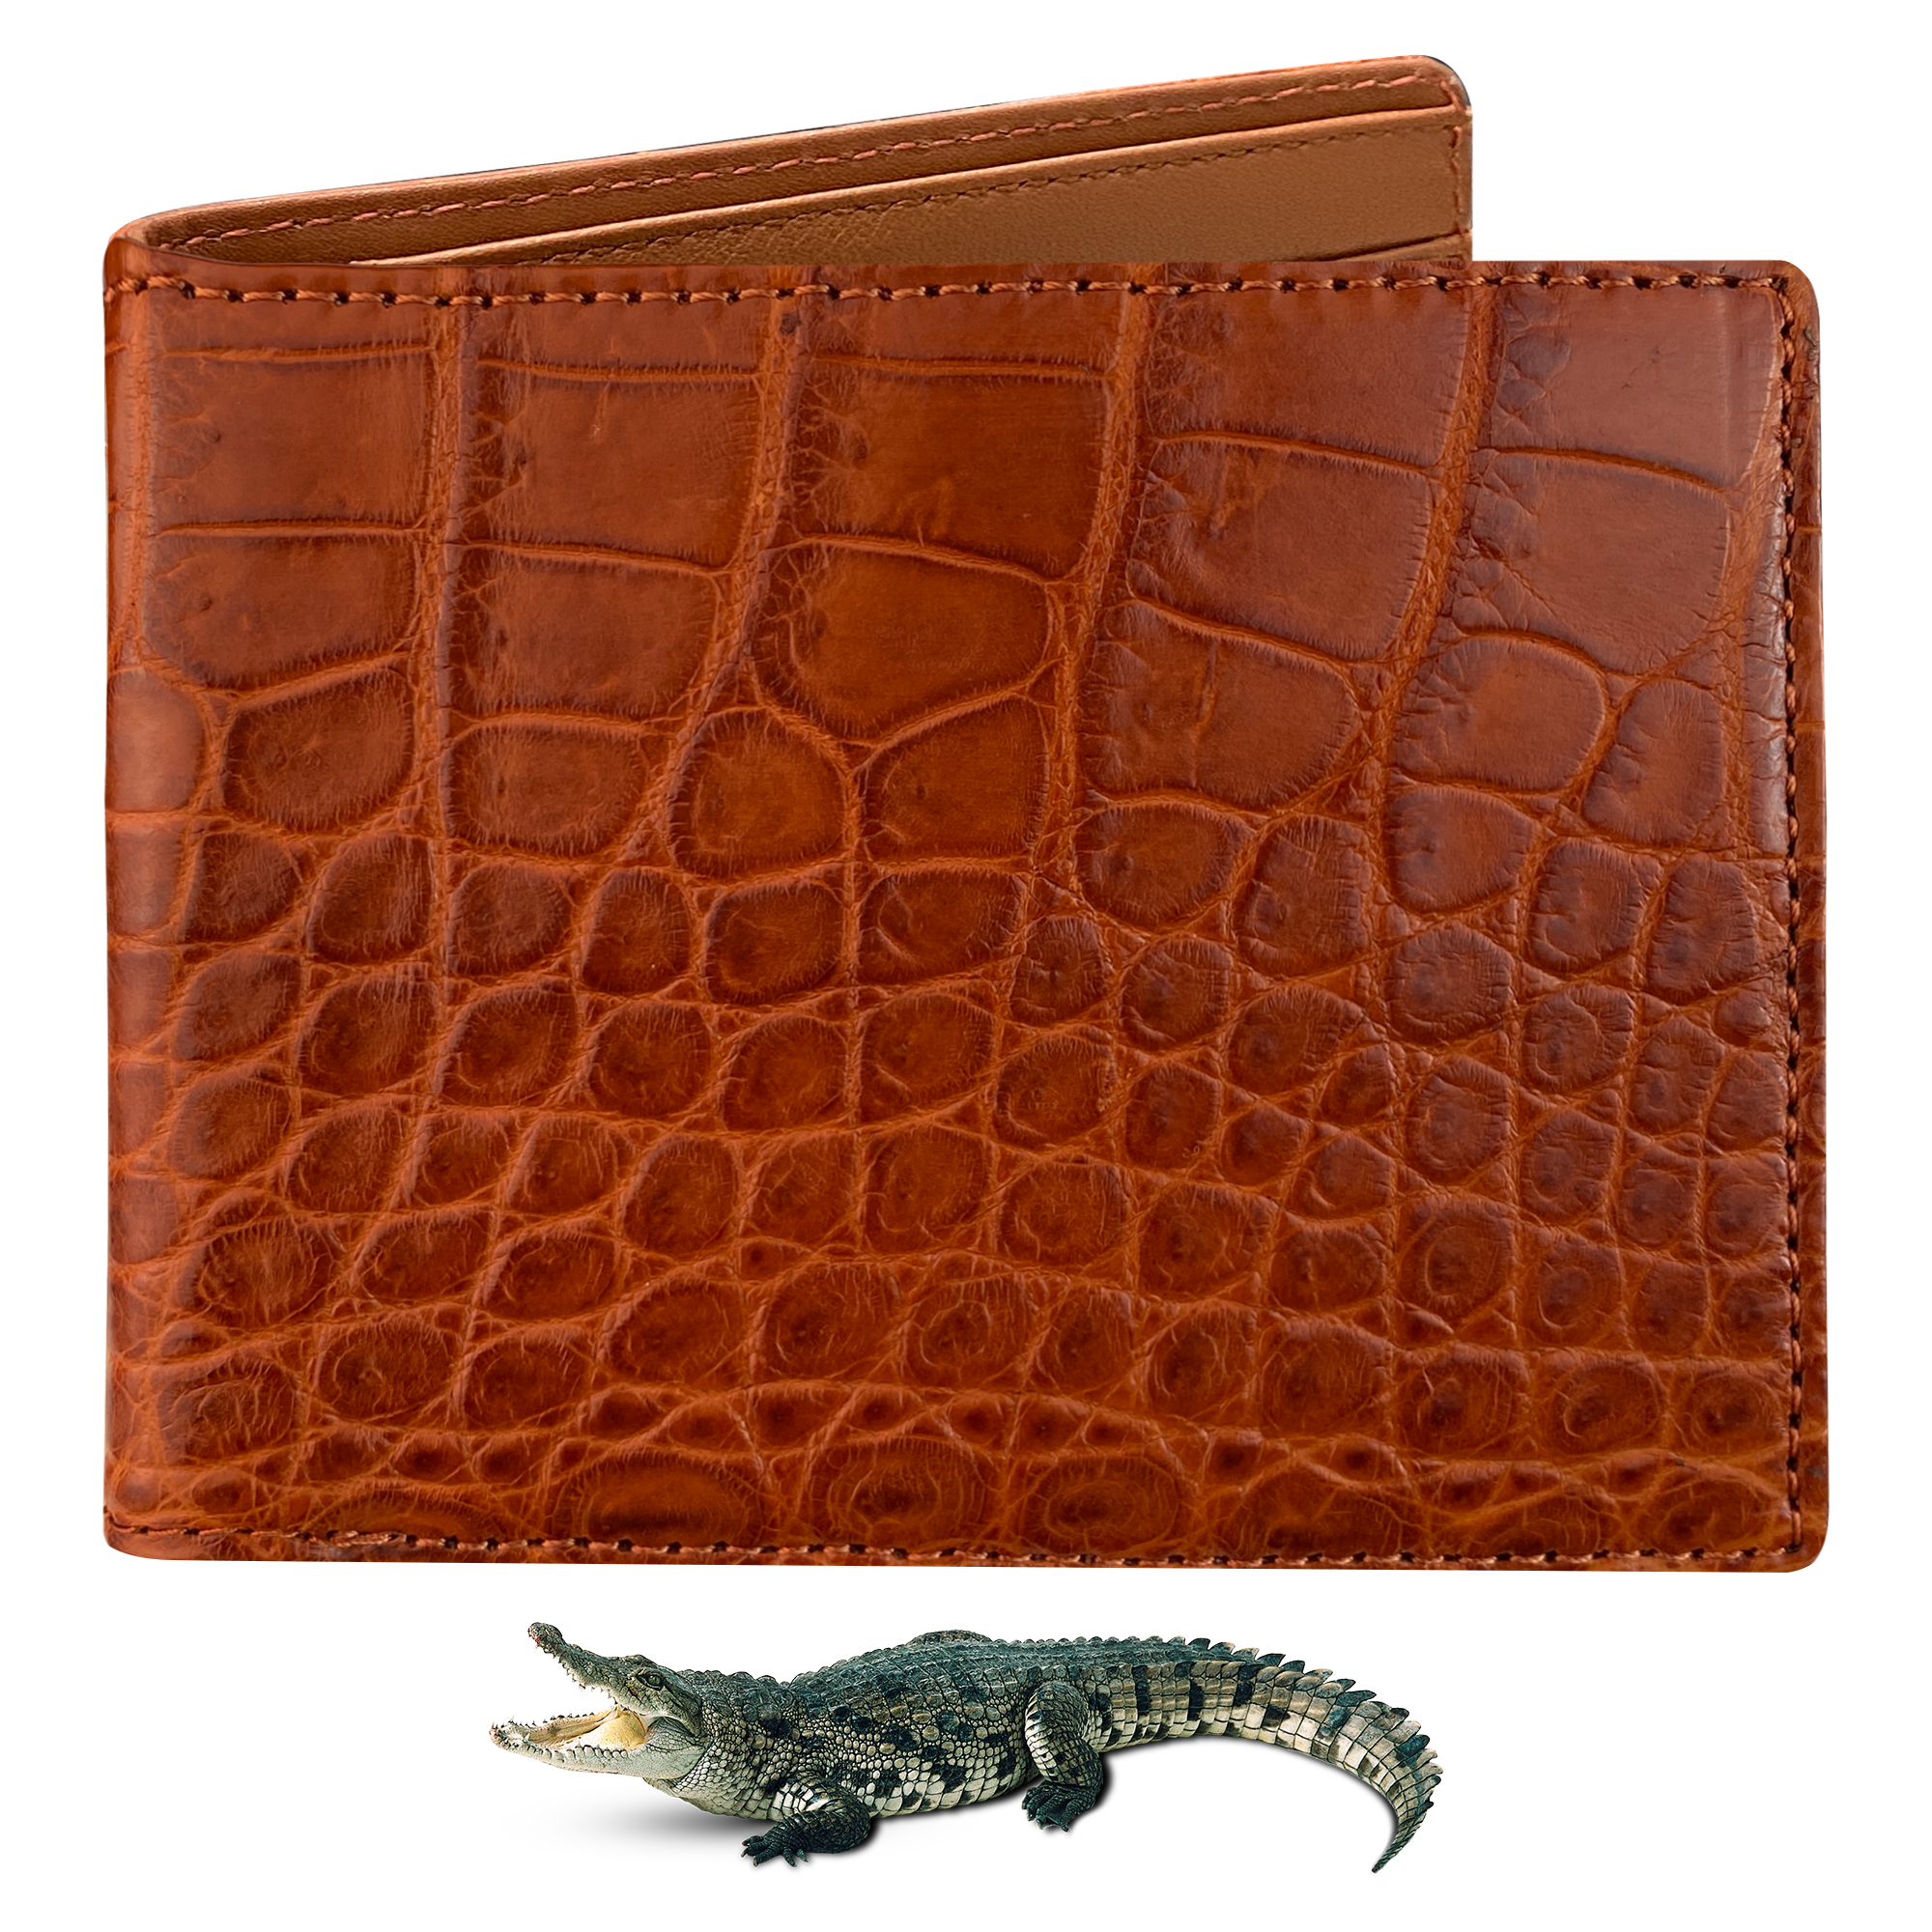 A better pic of the alligator wallet from my last post! Feel great